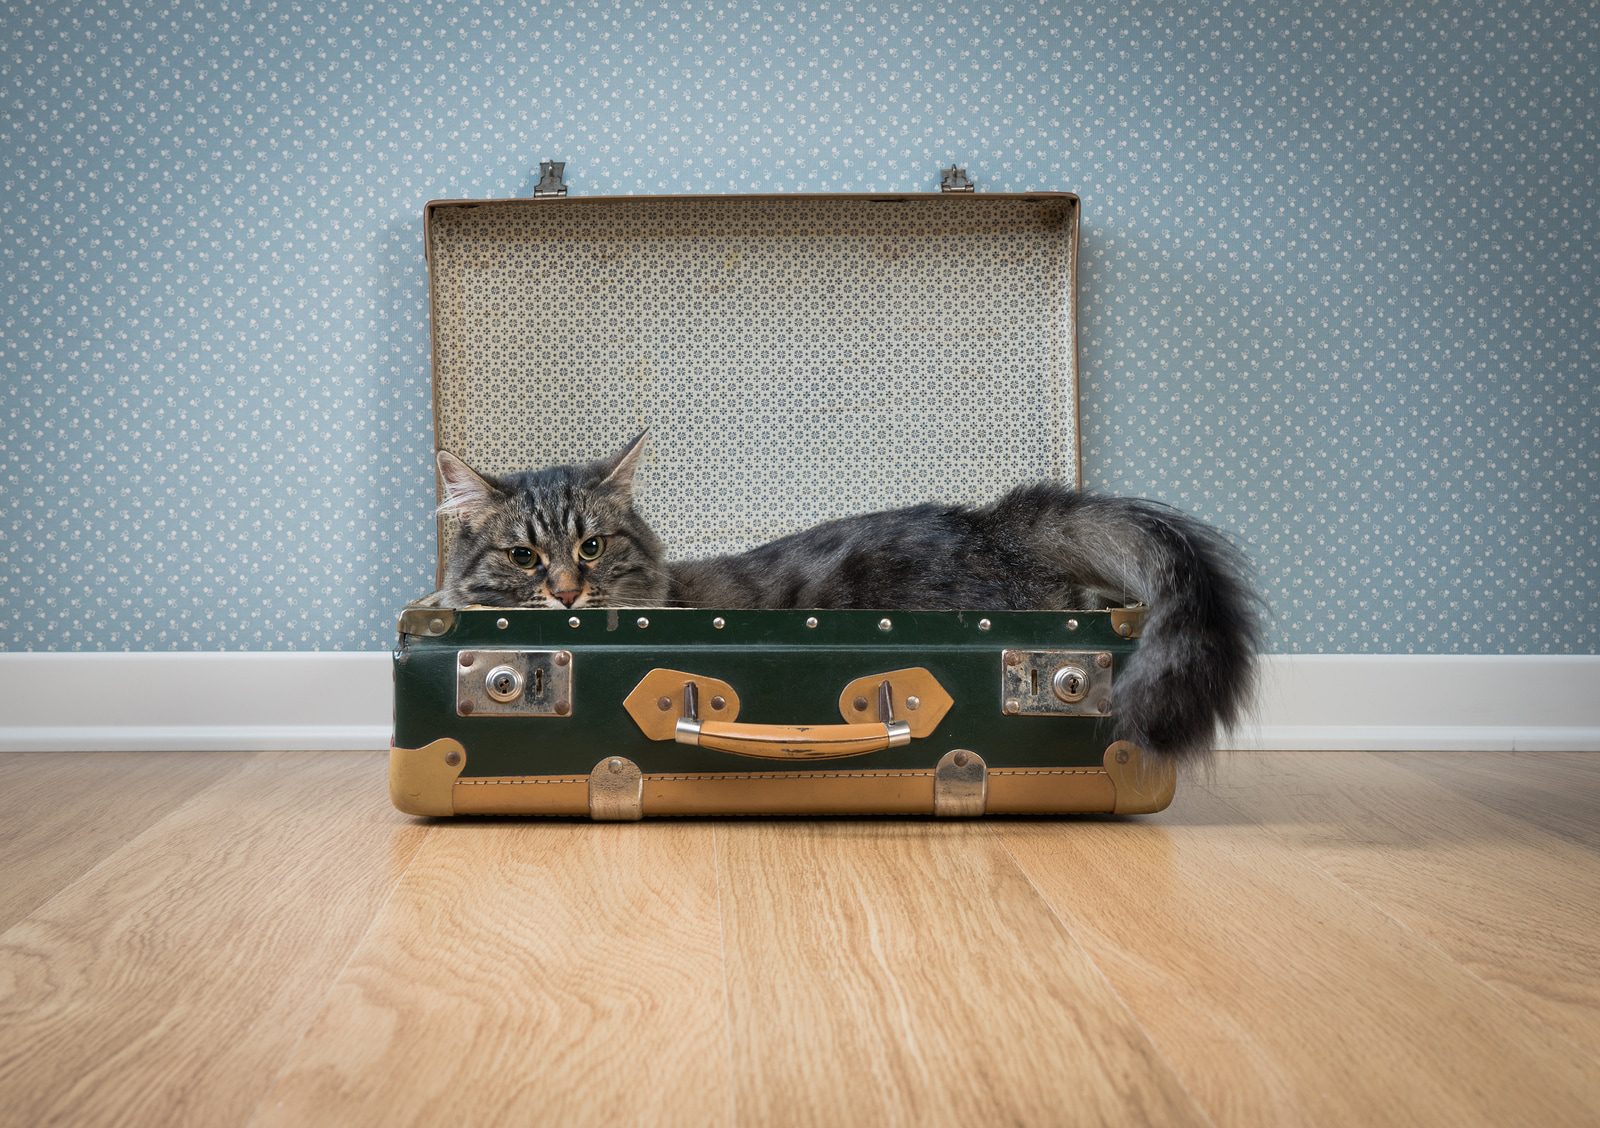 Everything you need when traveling with a cat